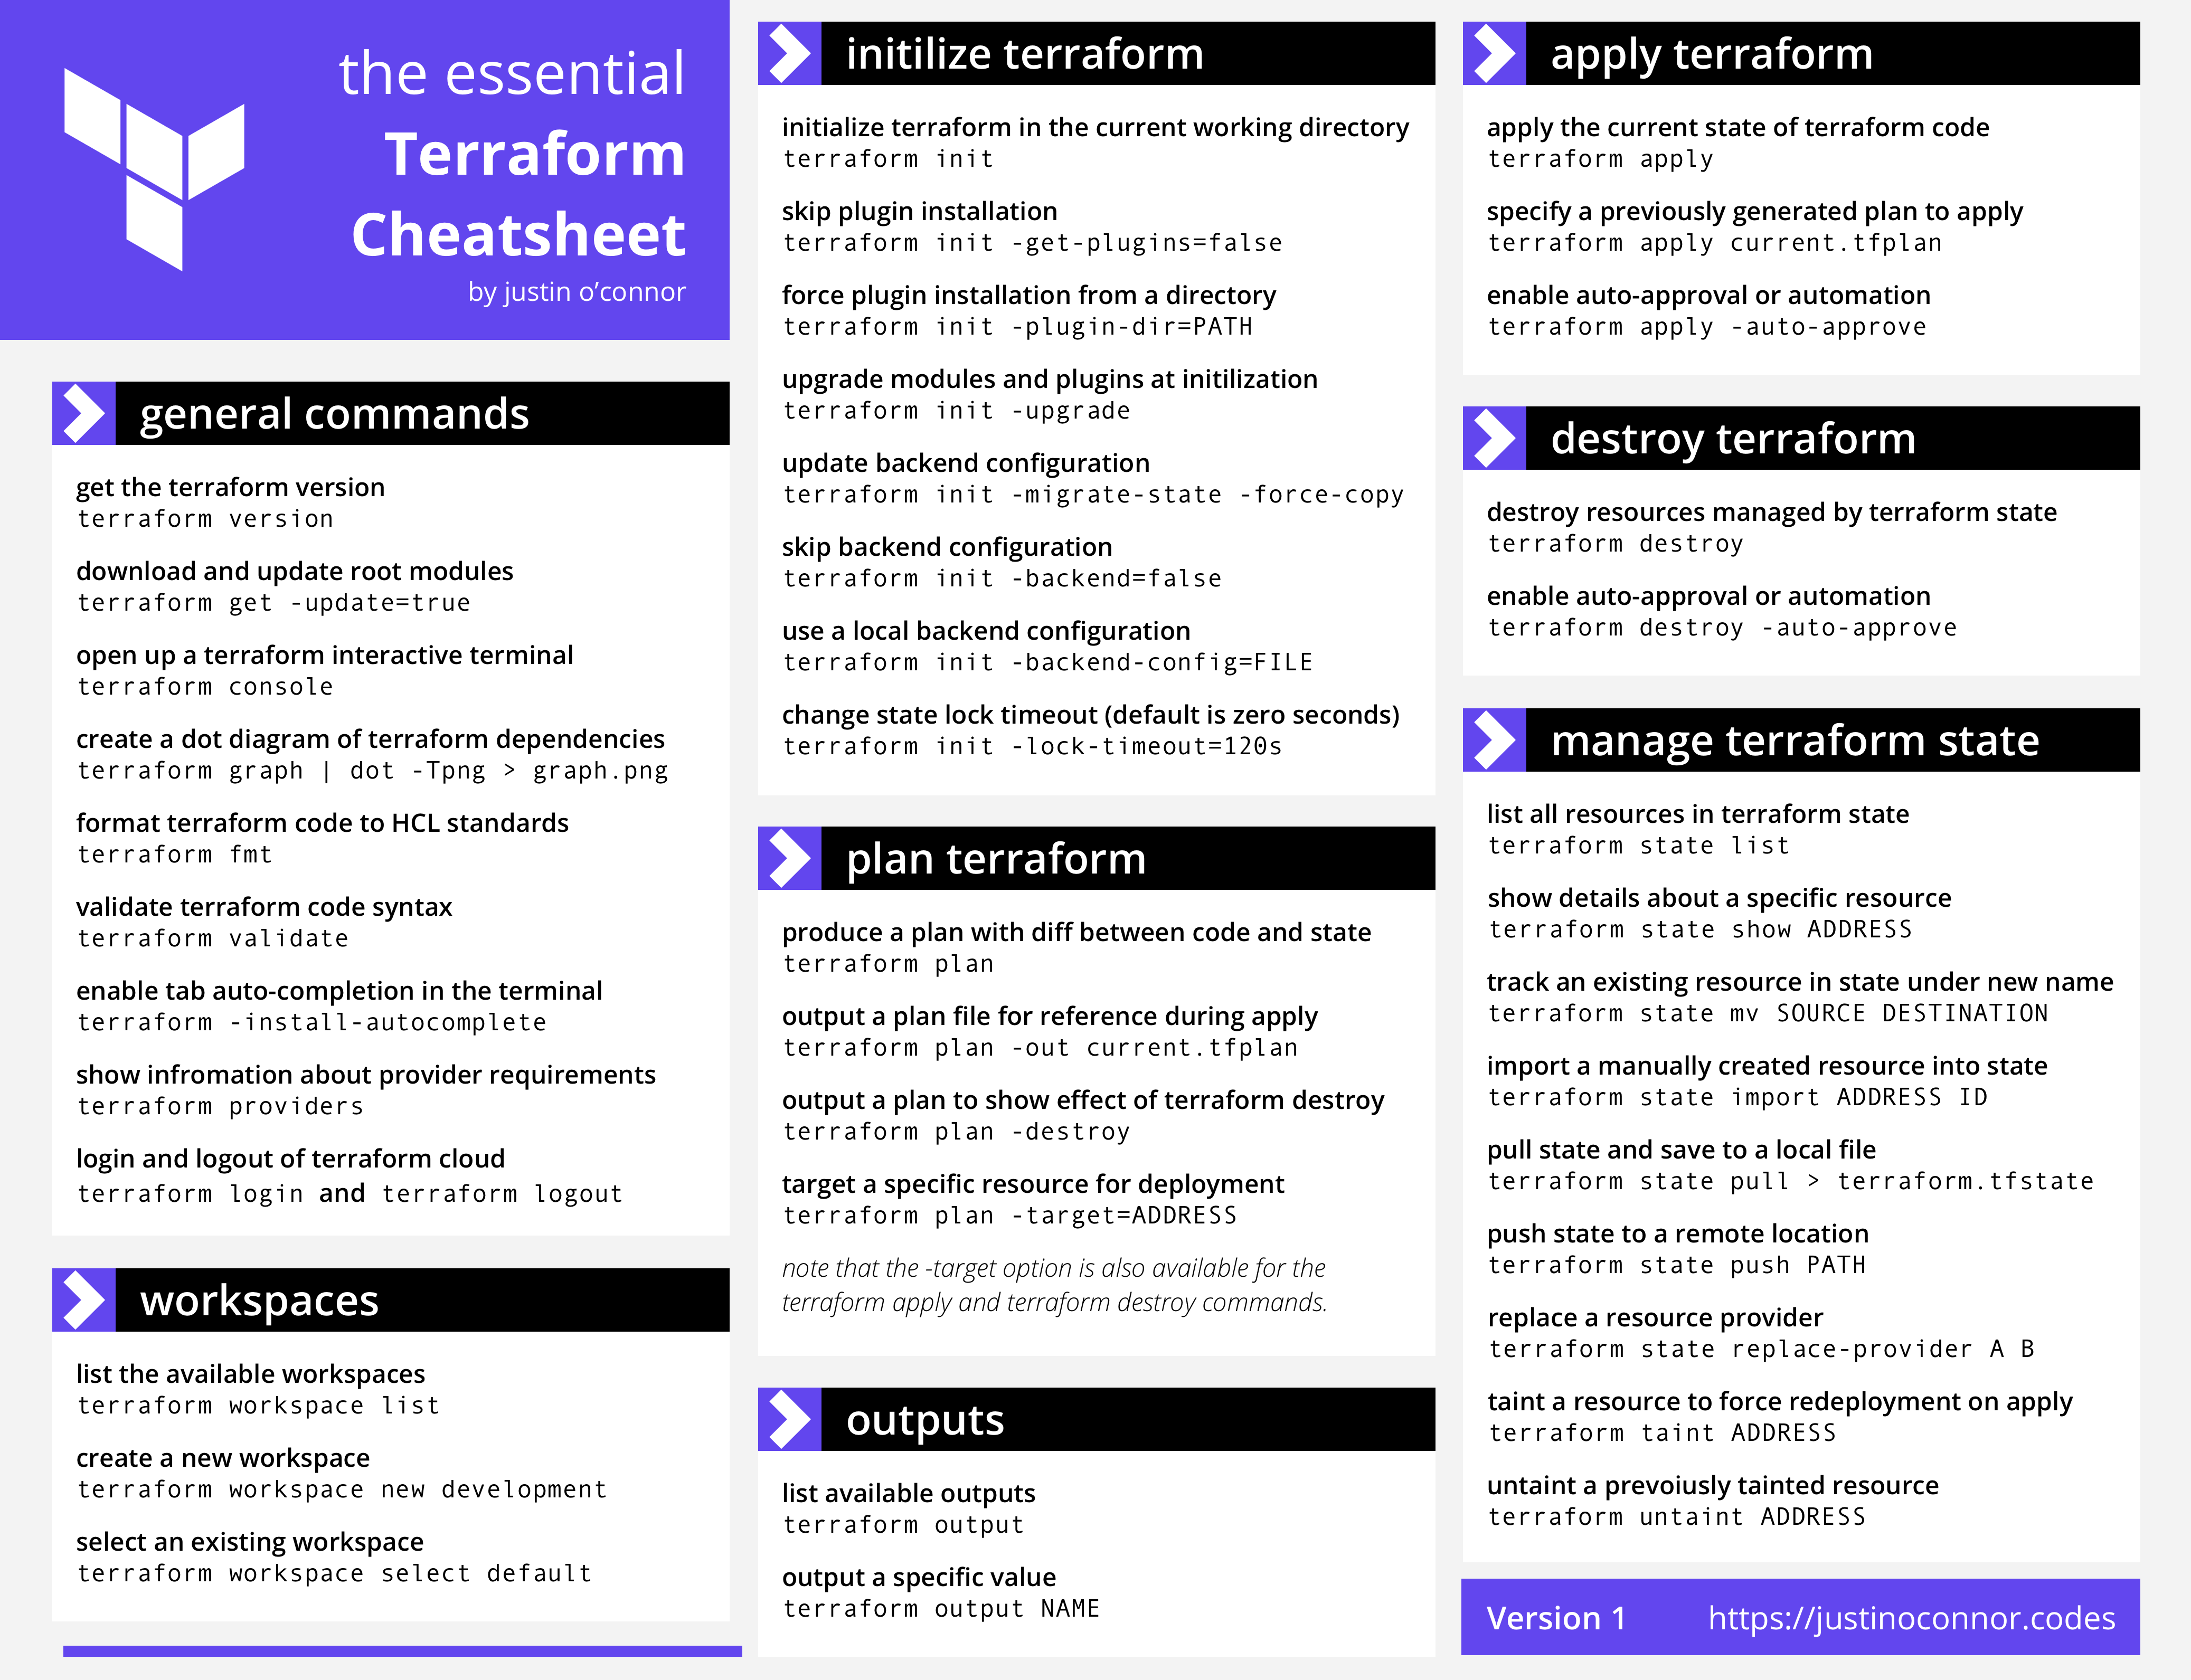 I created this Terraform cheat sheet while studying for the